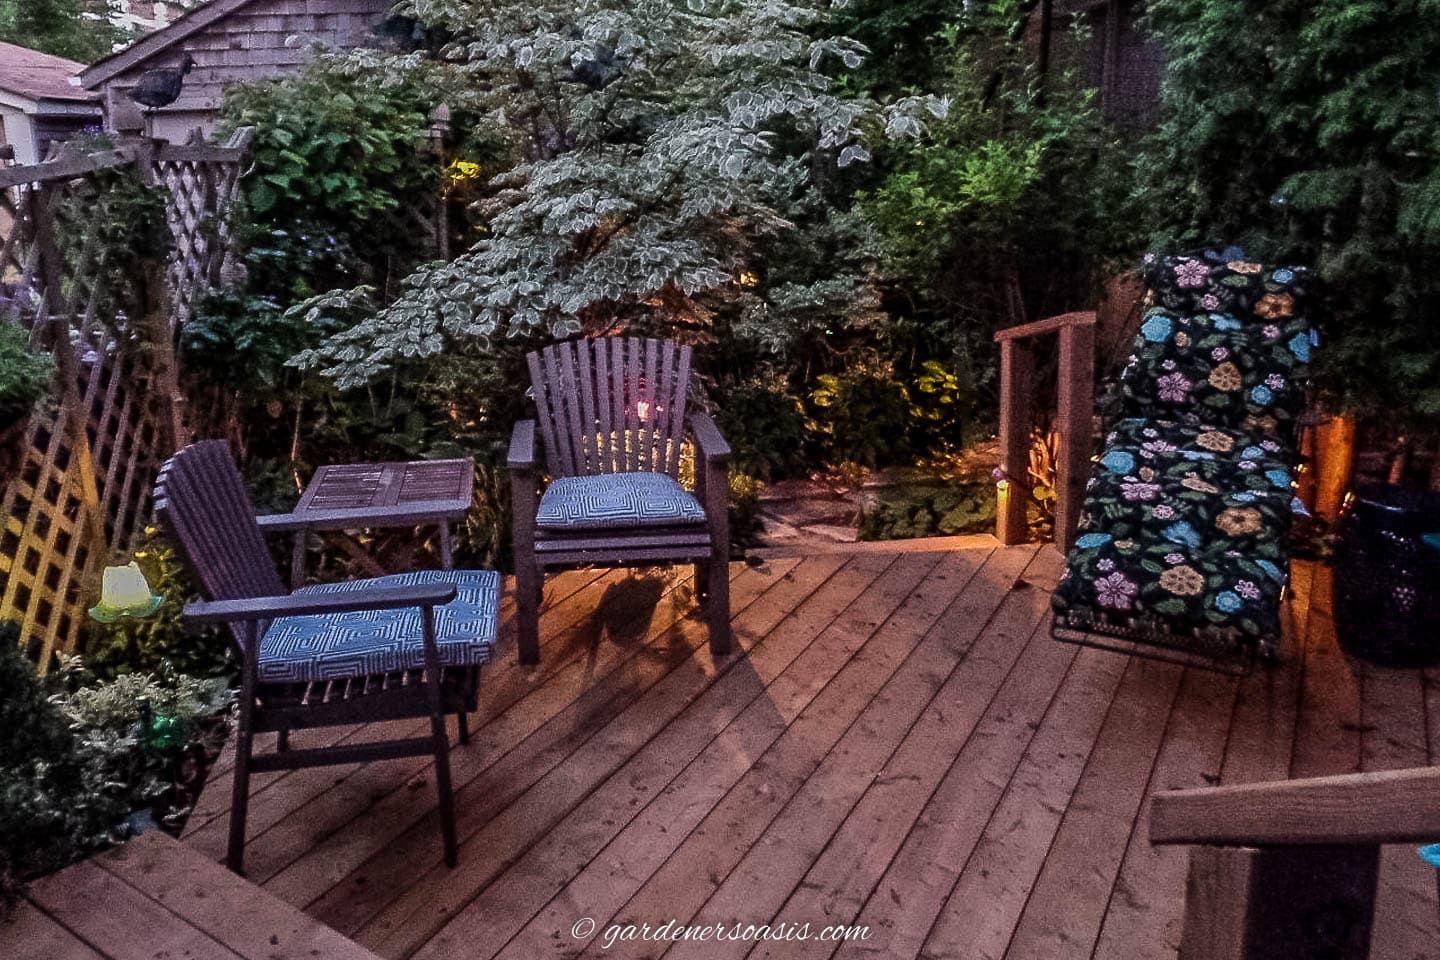 Chairs on a deck at night with landscape lights around the edge